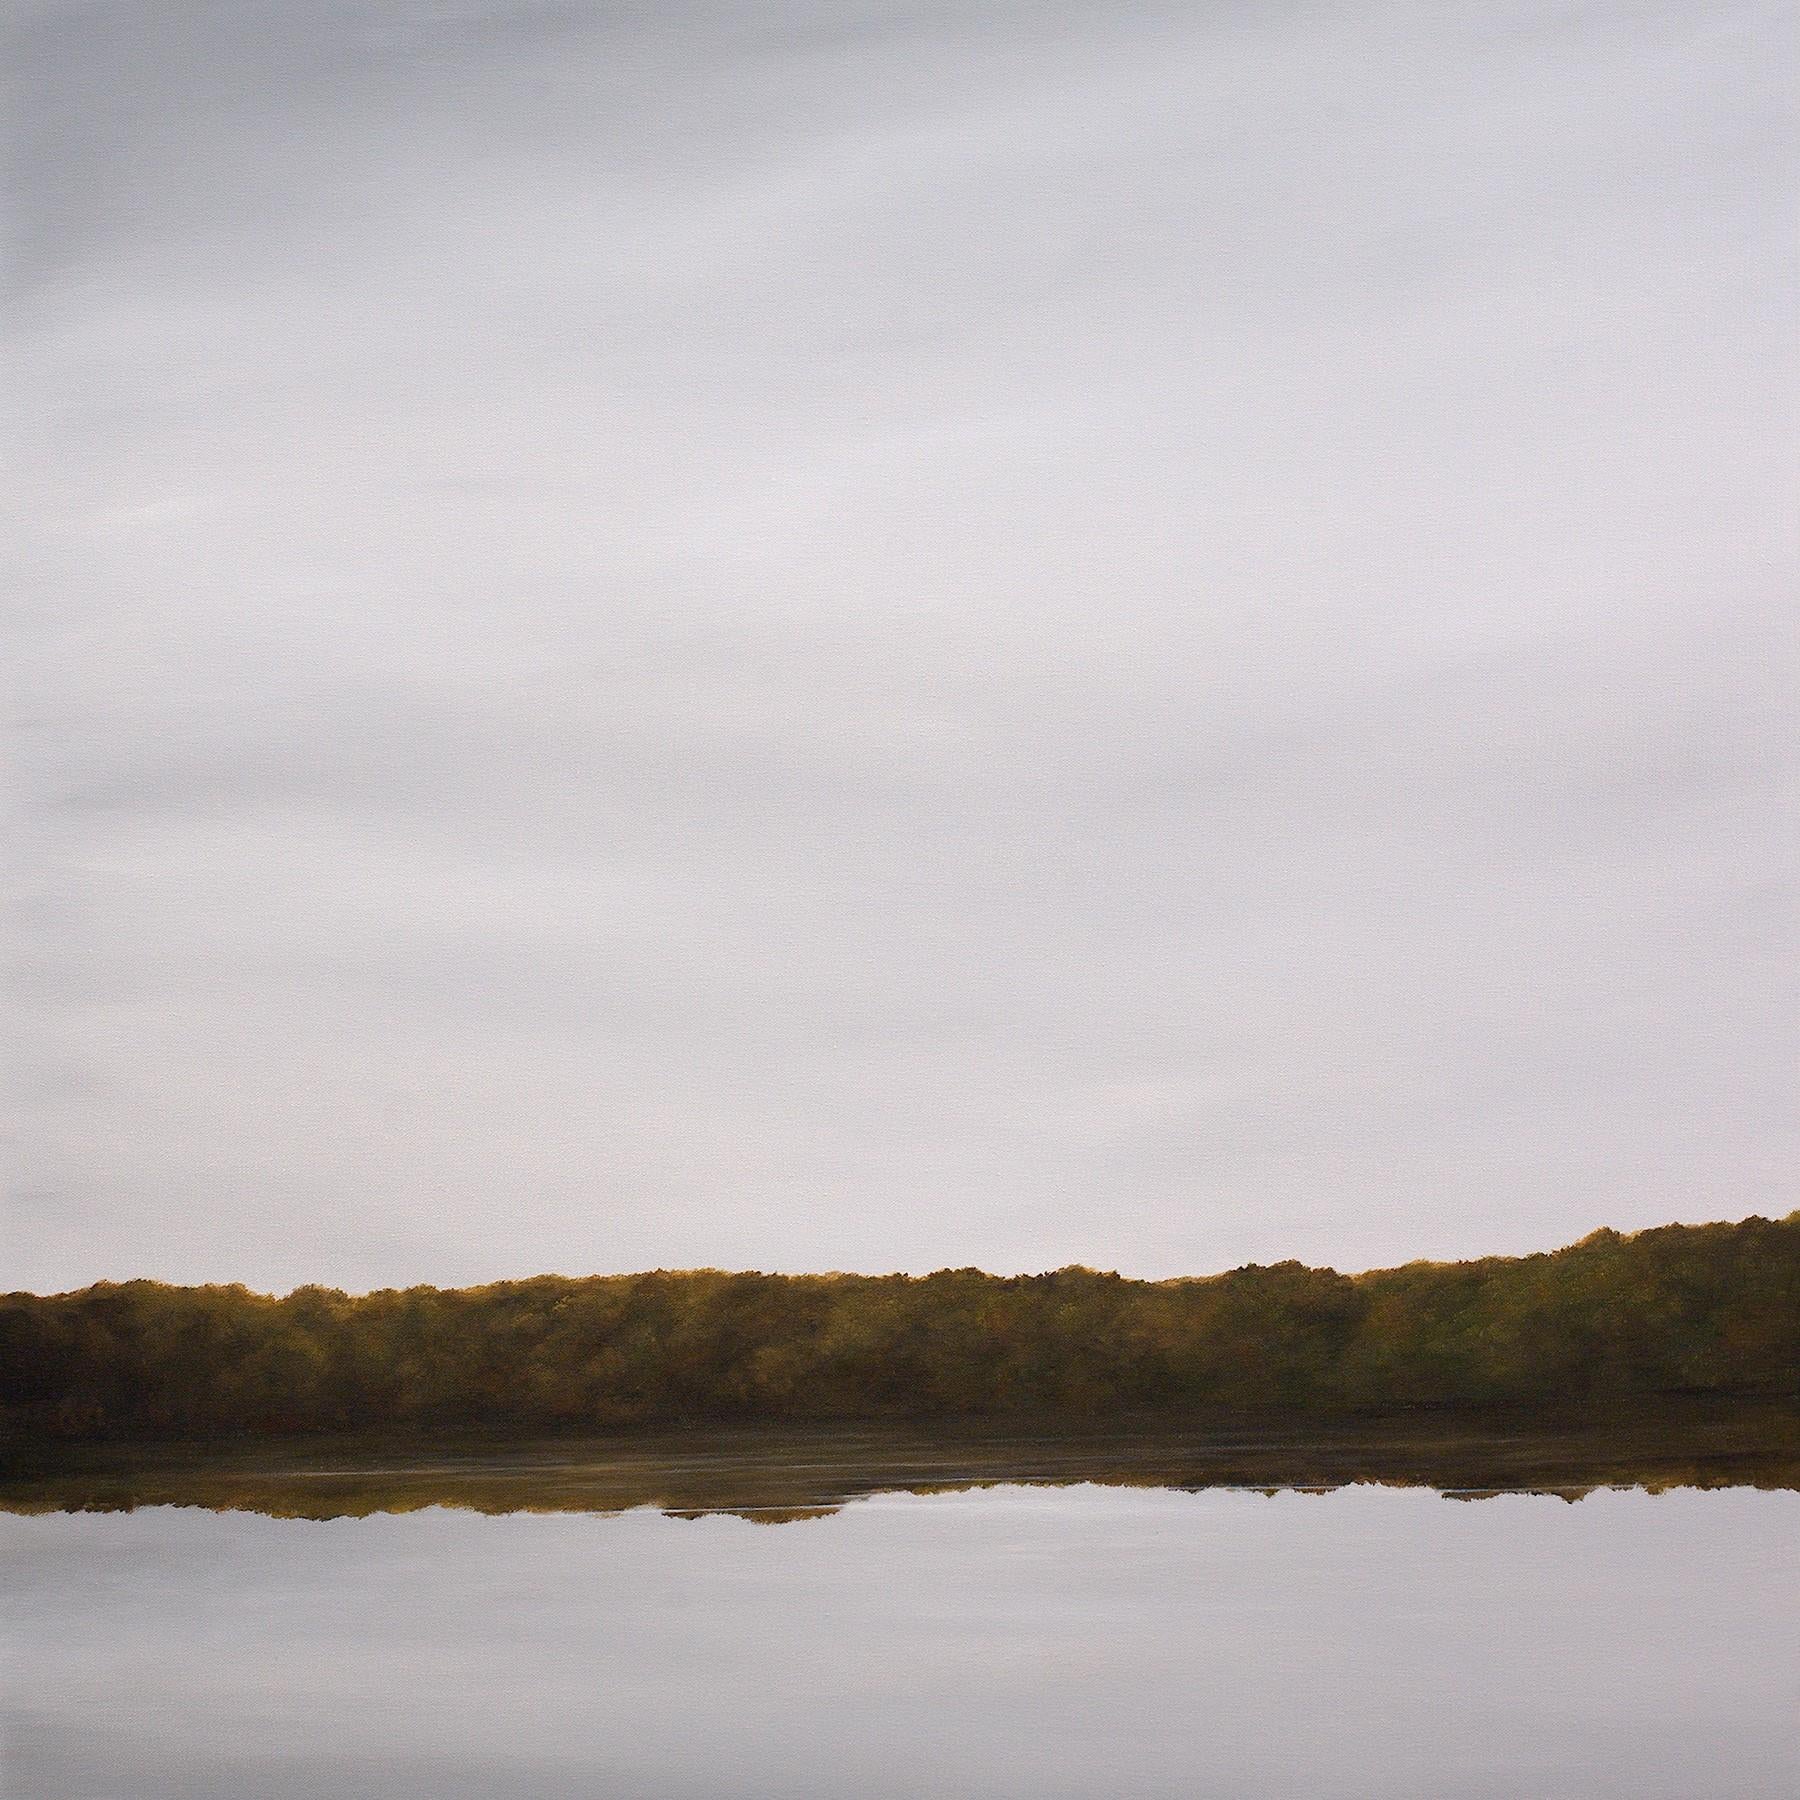 Ahzad Bogosian Landscape Painting - River Reflections #2 - Minimalist Oil Painting of Gray Sky Reflected in Water